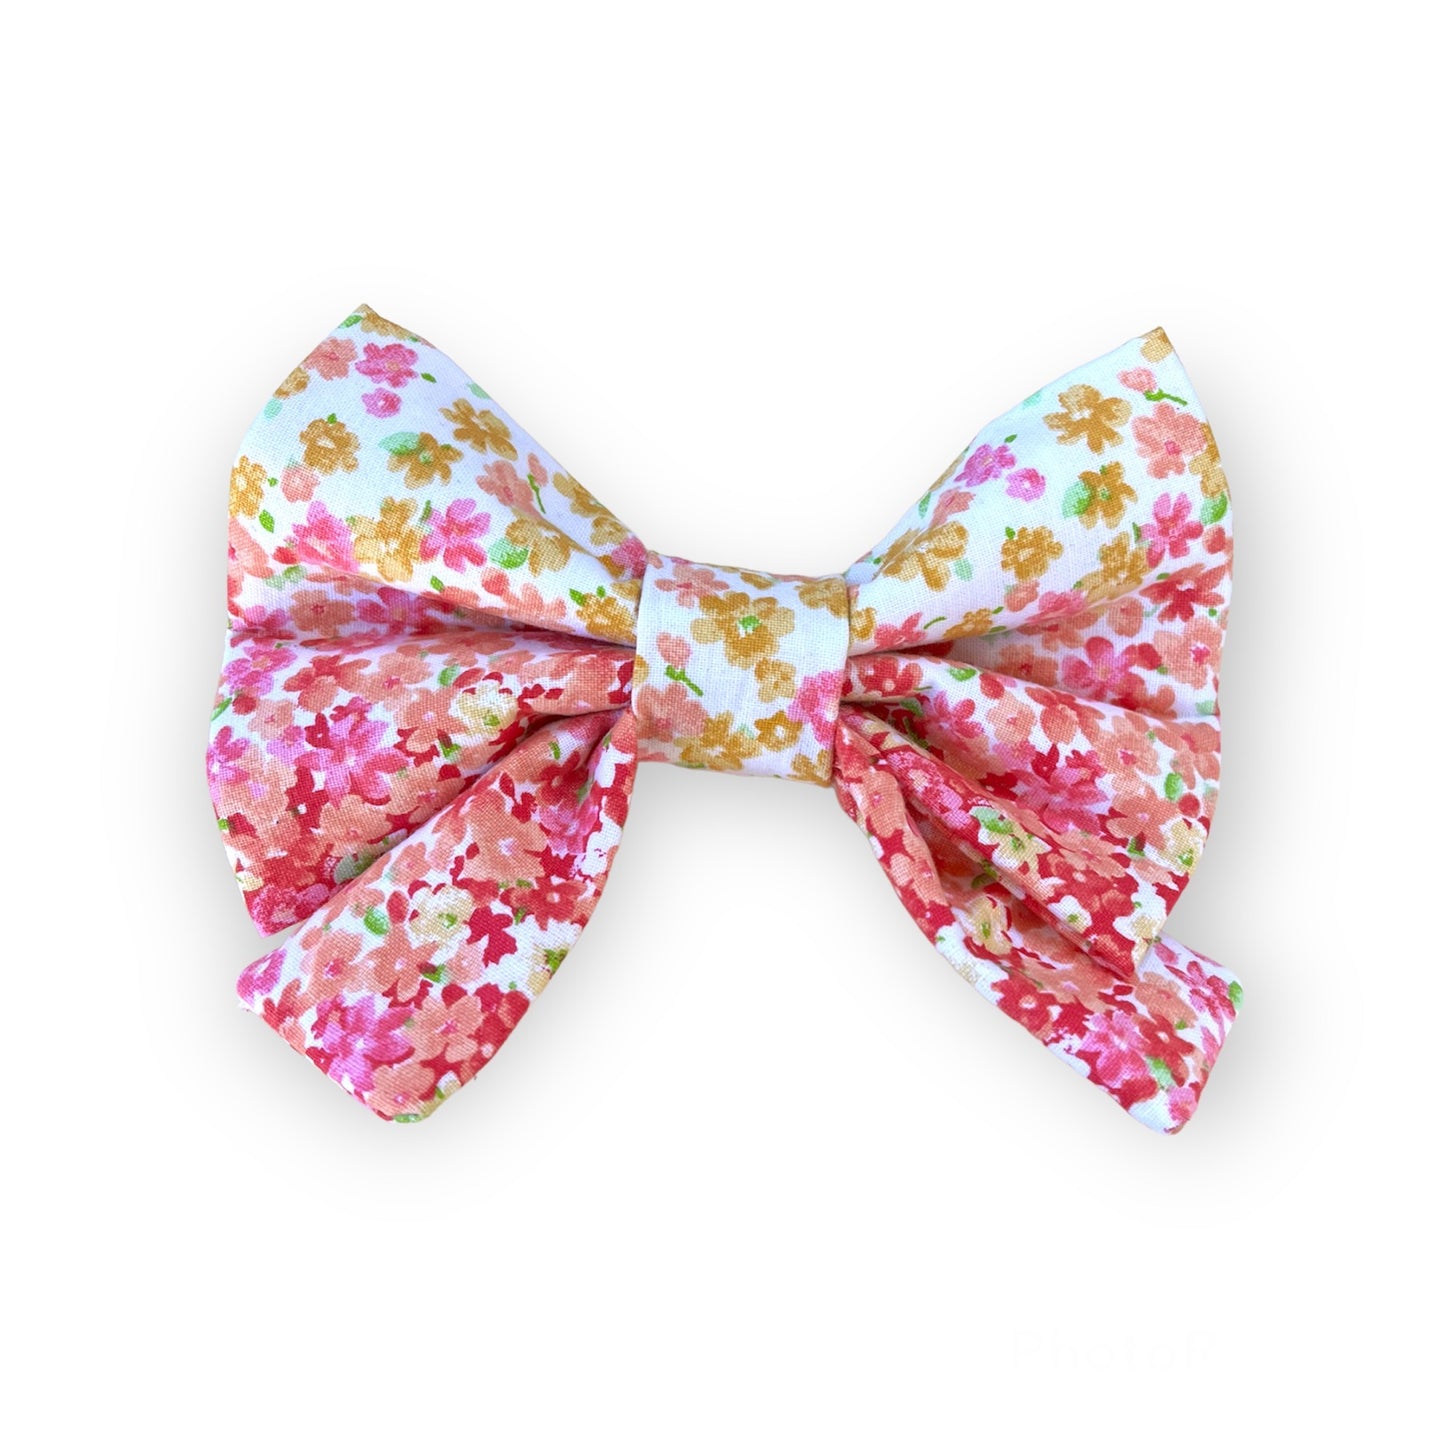 Bougie Bow Tie Wildflowers Pink and Golden